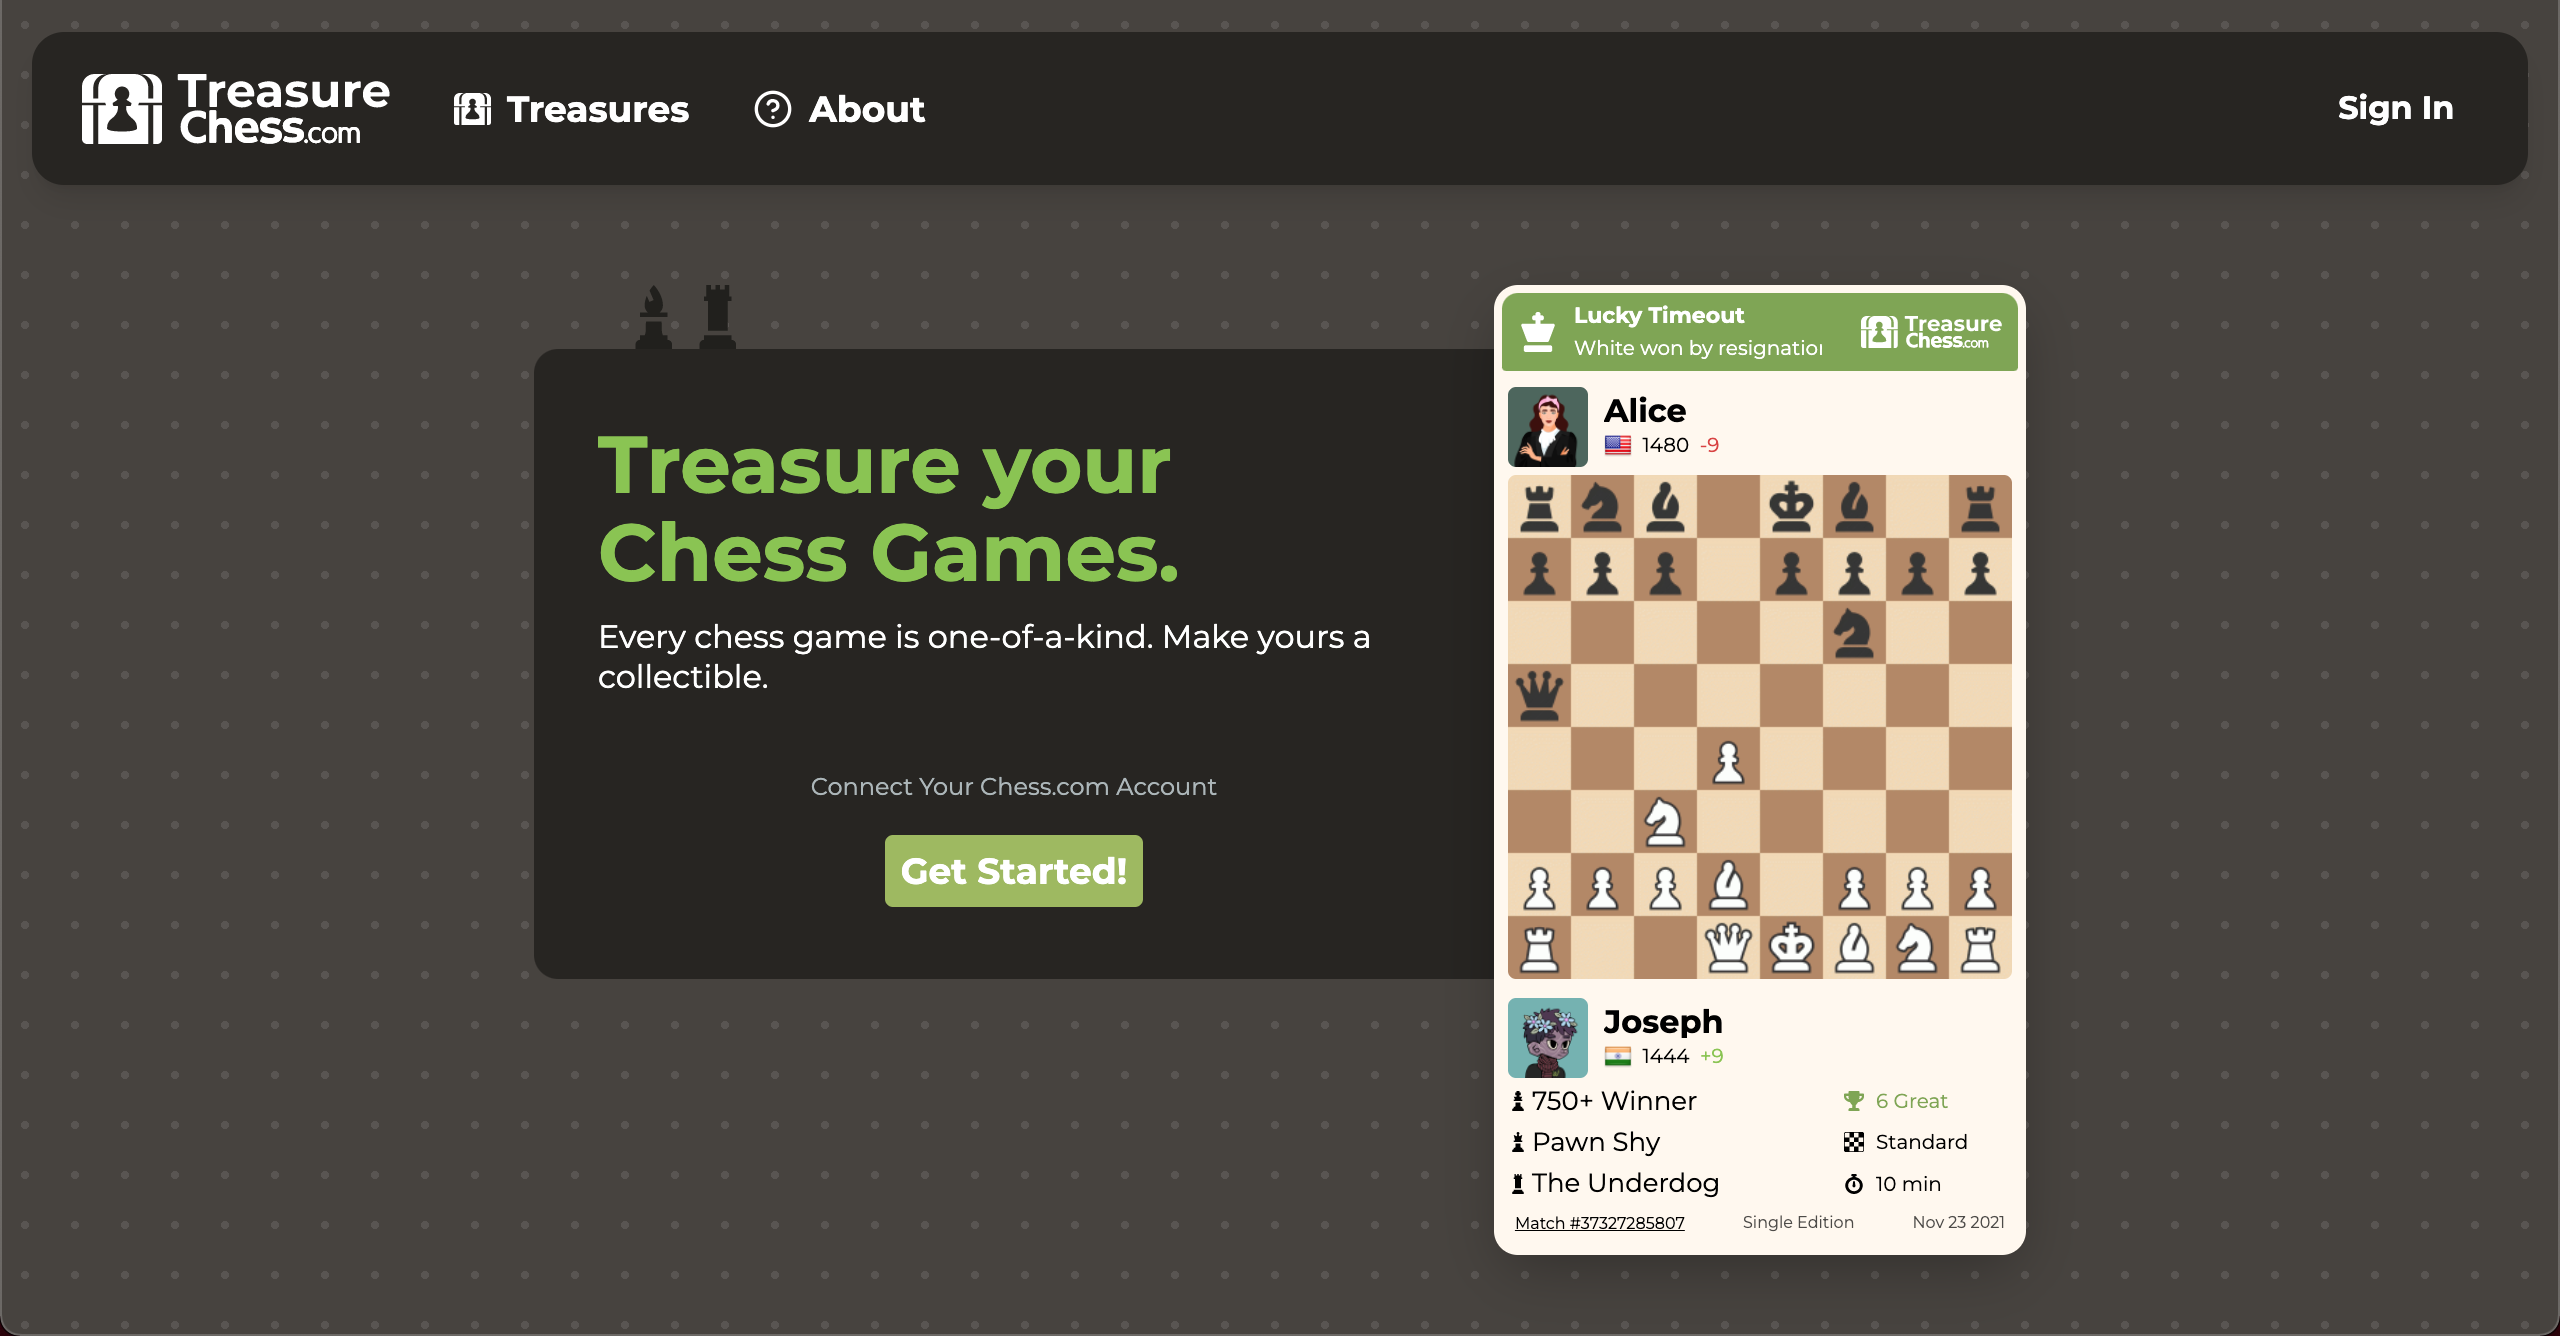 Mate in 2 chess puzzles Archives - SparkChess